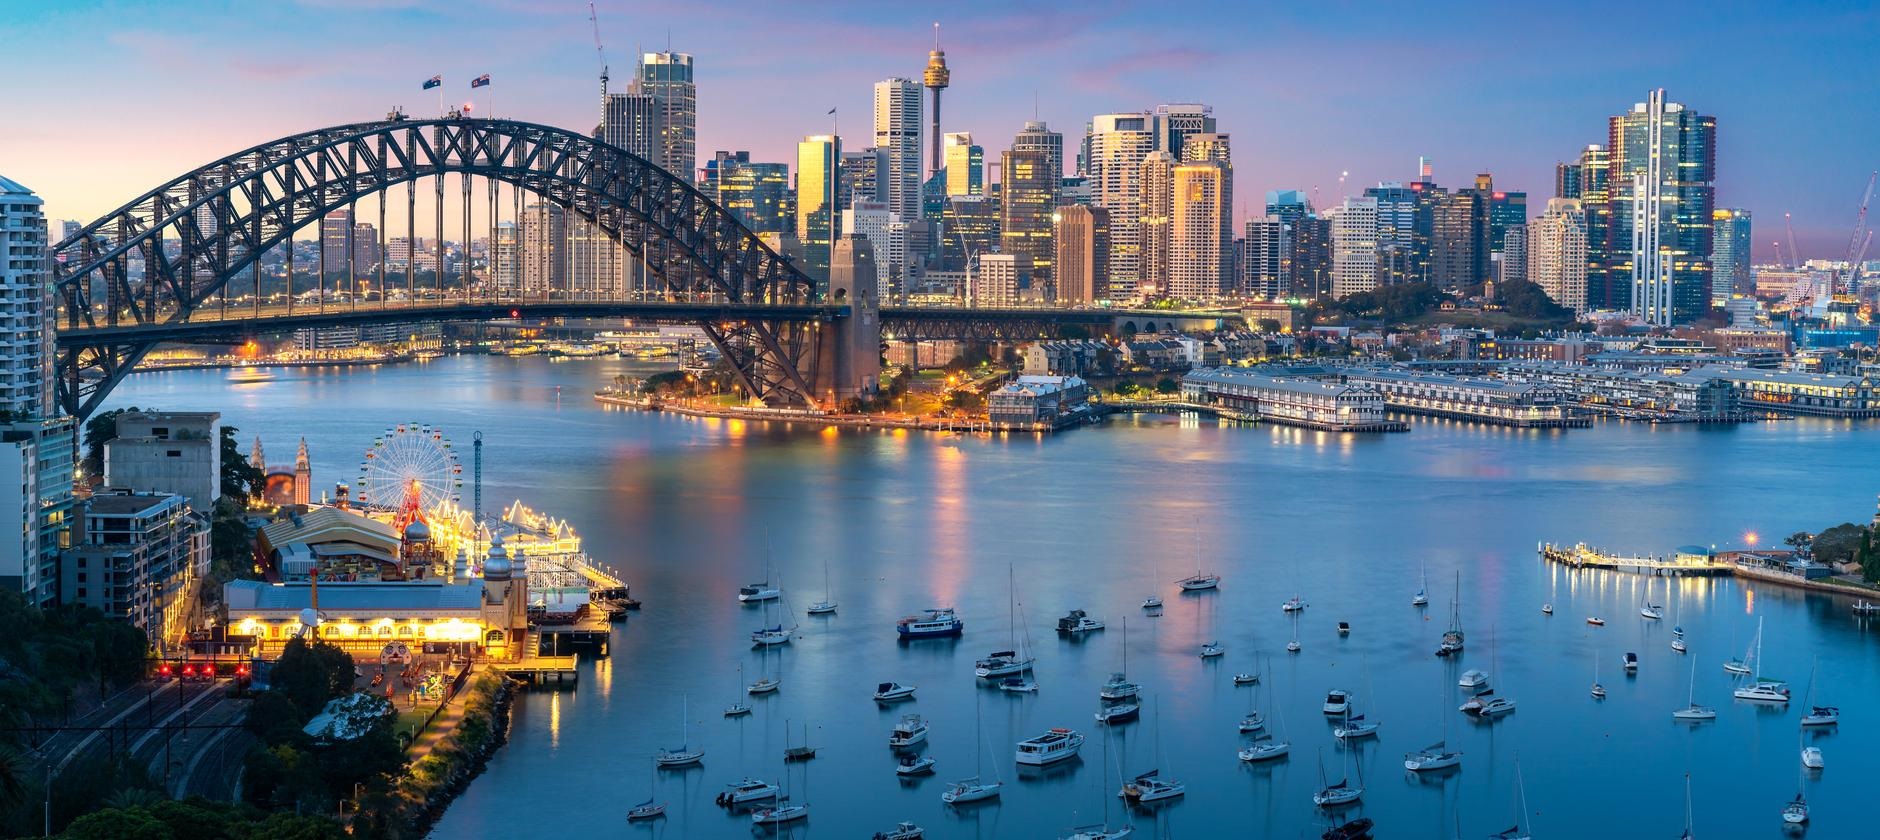 Sydney's preliminary clearance rate rebounds to 67.5%